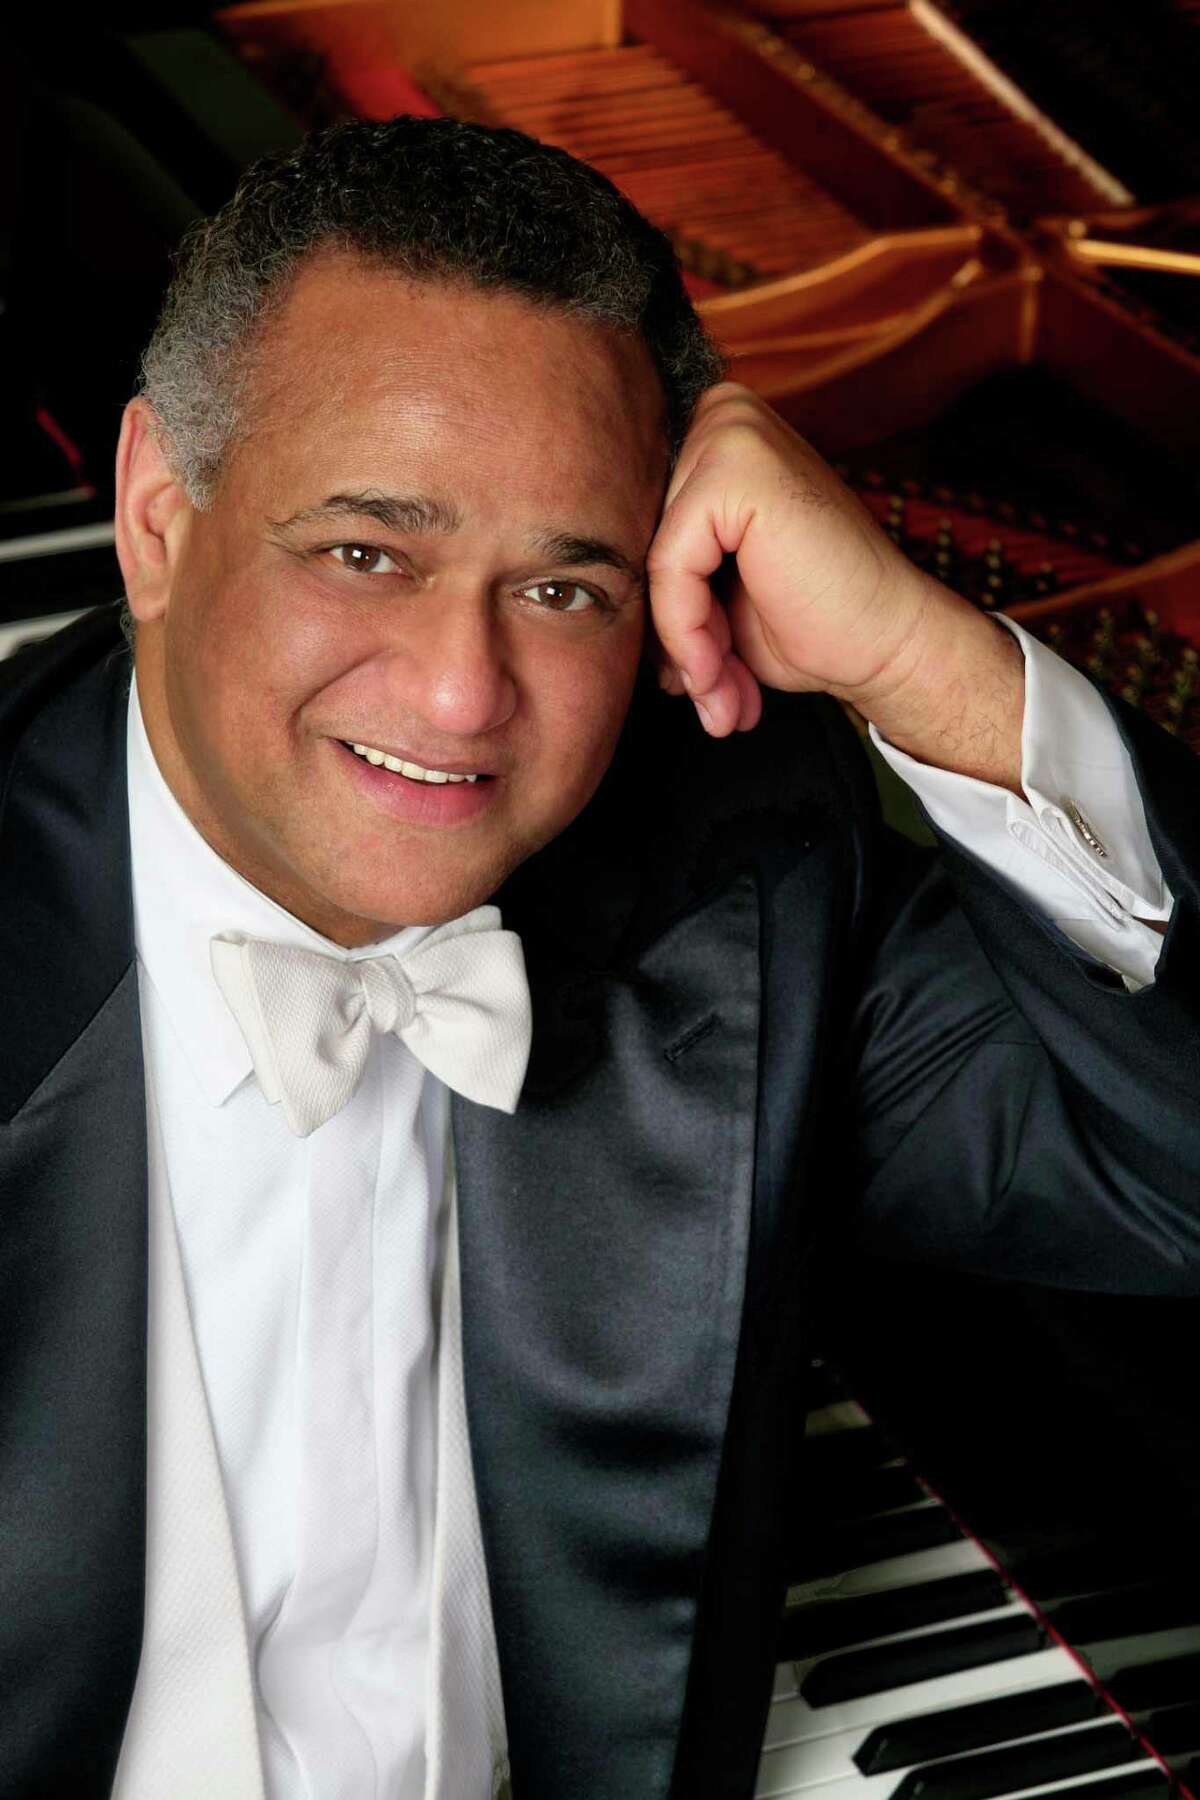 André Watts has appeared several times with the San Antonio Symphony since the 1970s, the last time in 2005. On Friday, he delivered another concerto to remember.